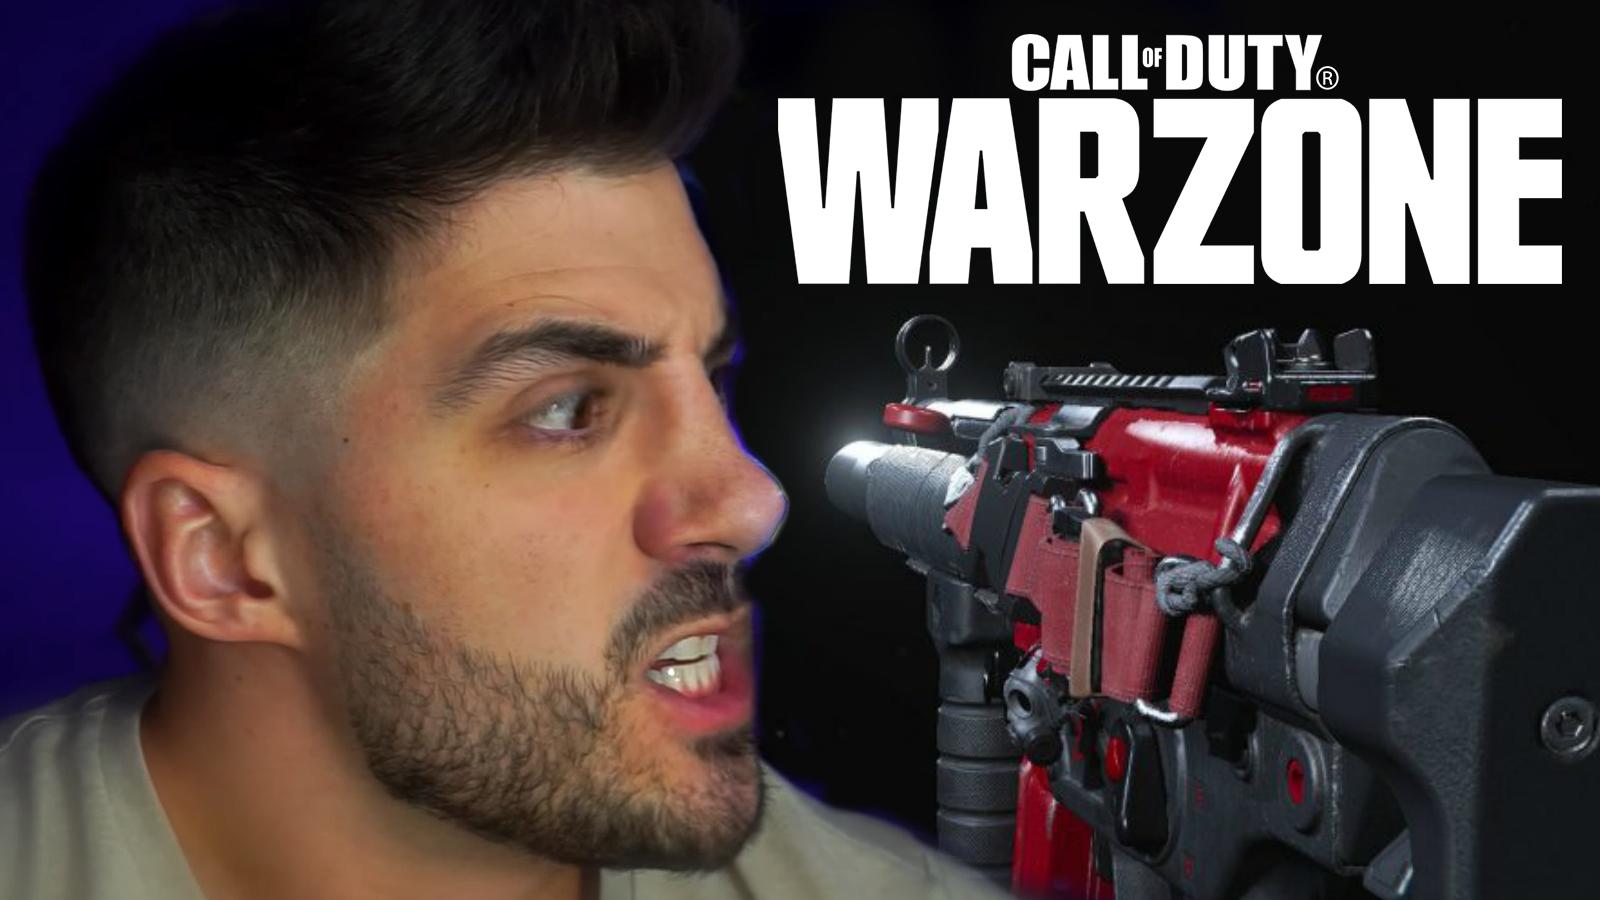 Nickmercs and MP5 in Warzone